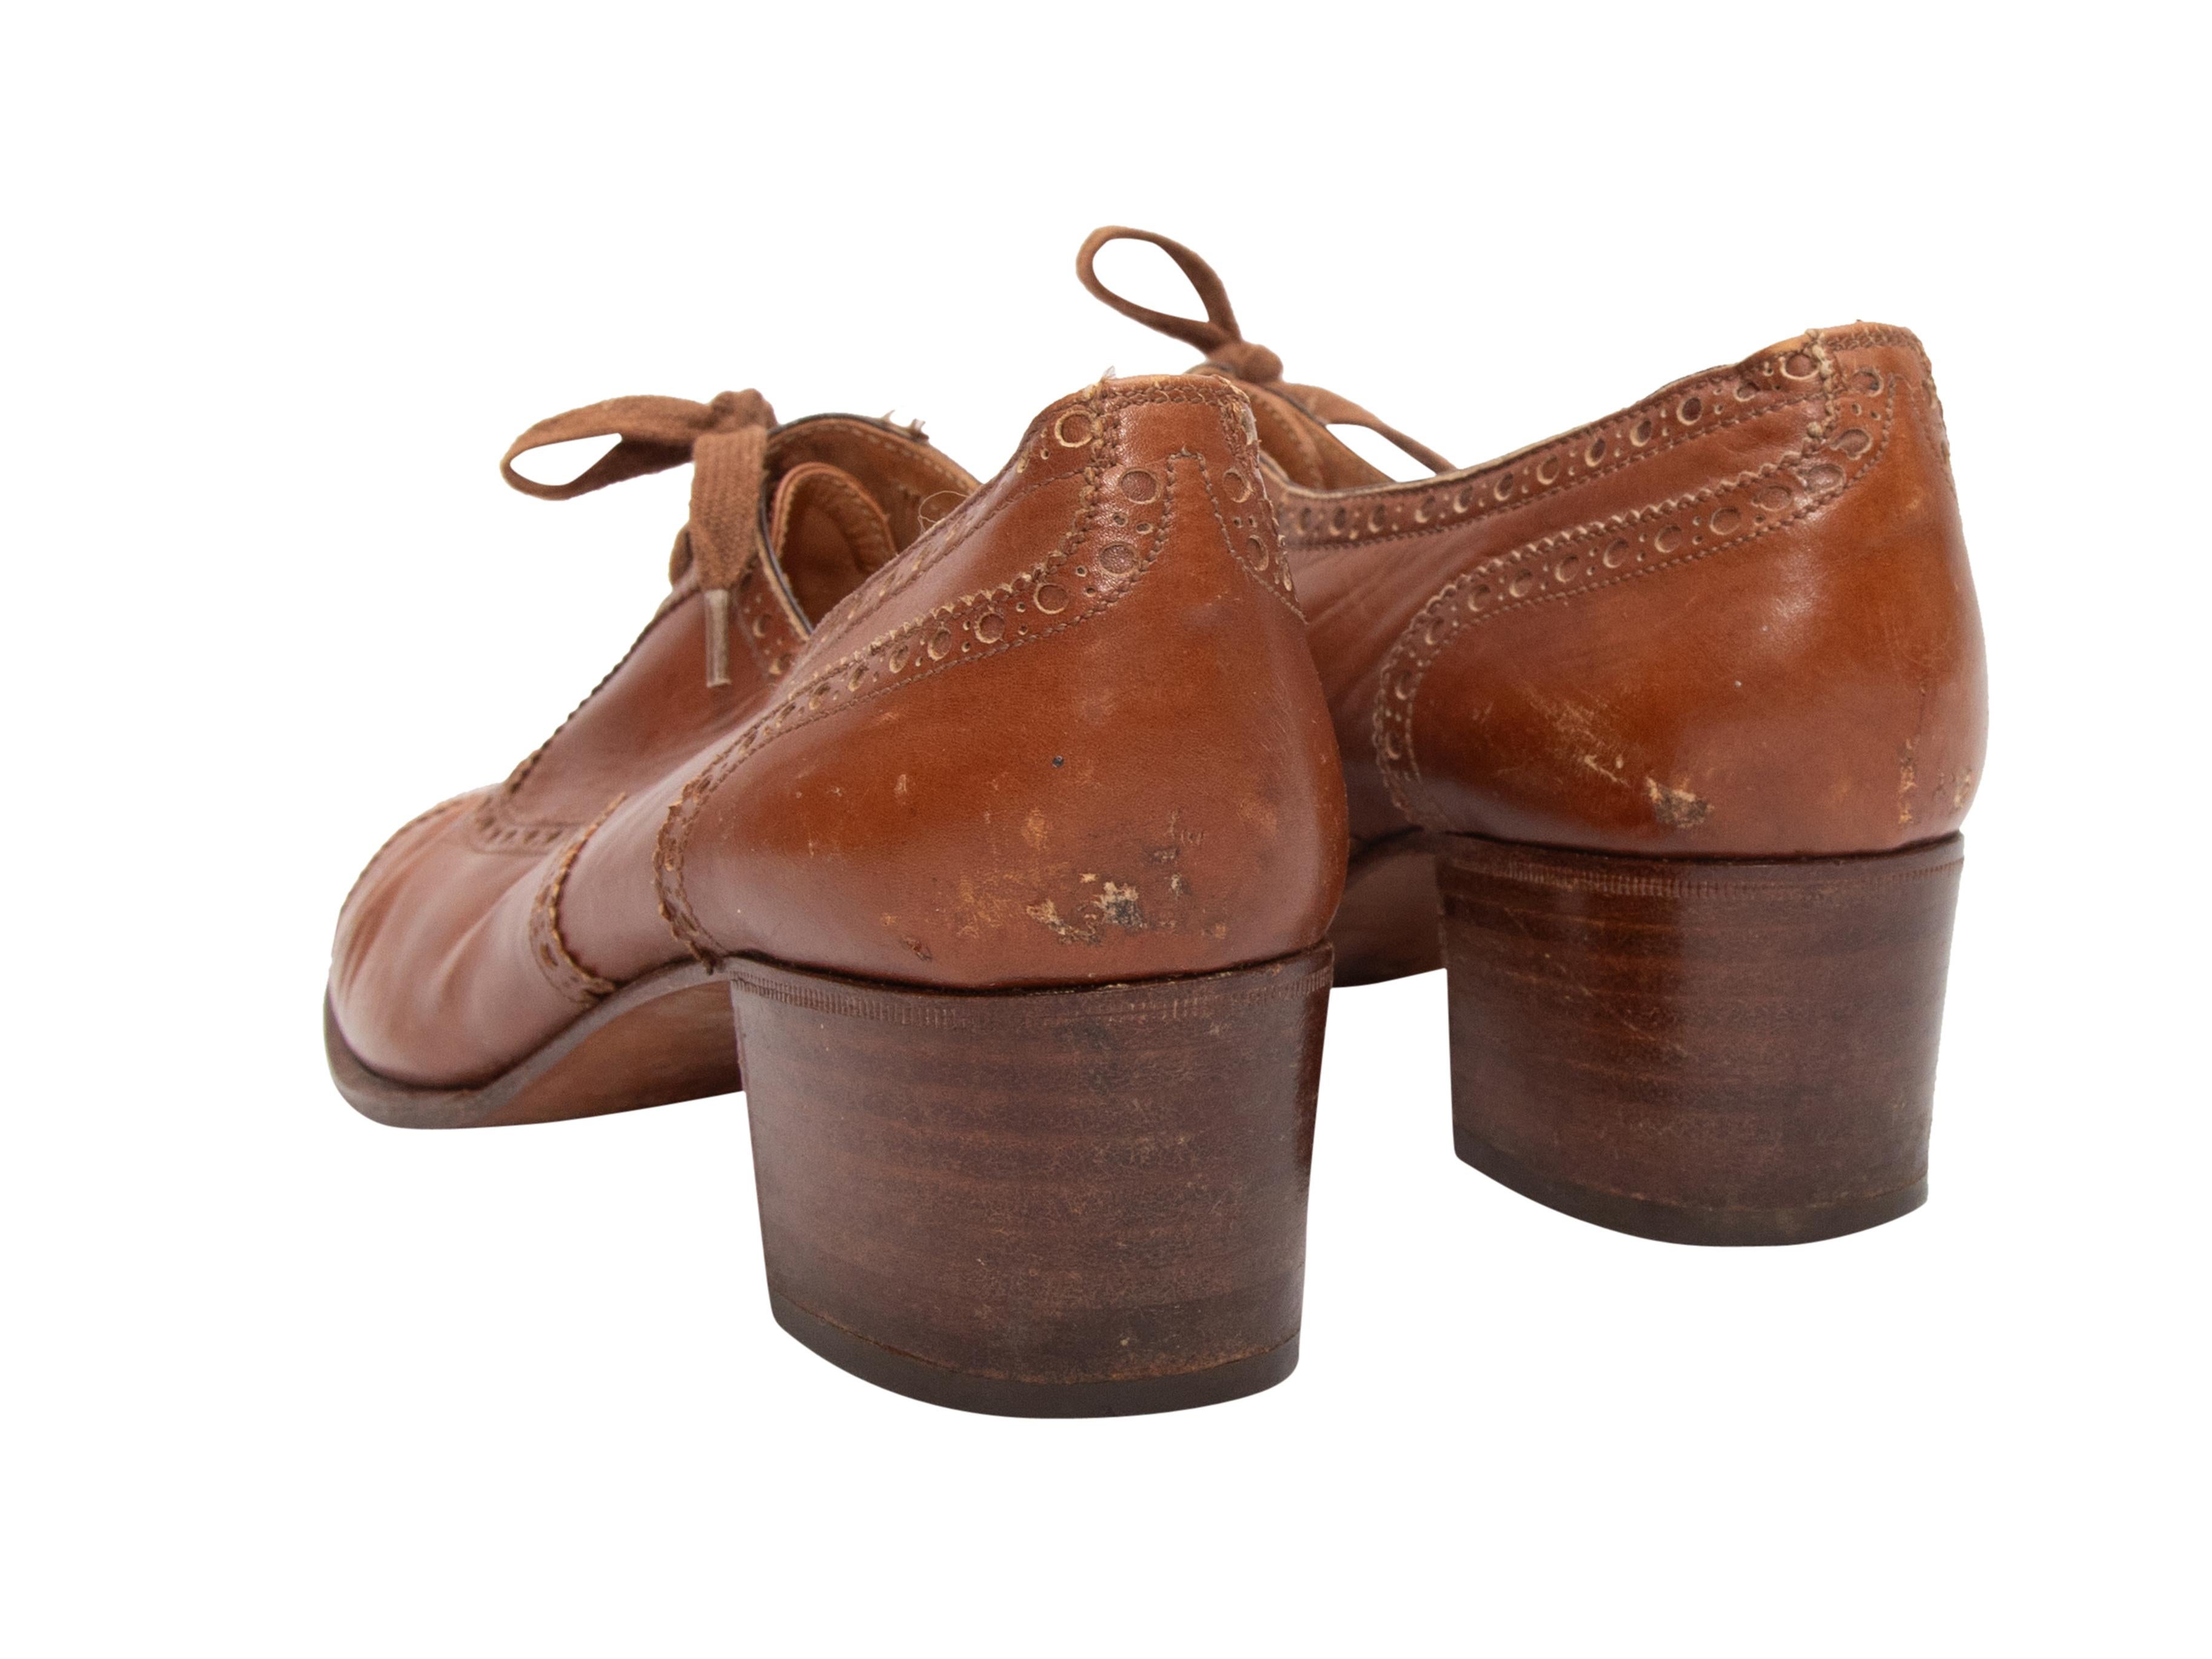 Vintage tan leather heeled oxfords by Hermes. Stacked heels. Lace-up tie closures at tops. 2